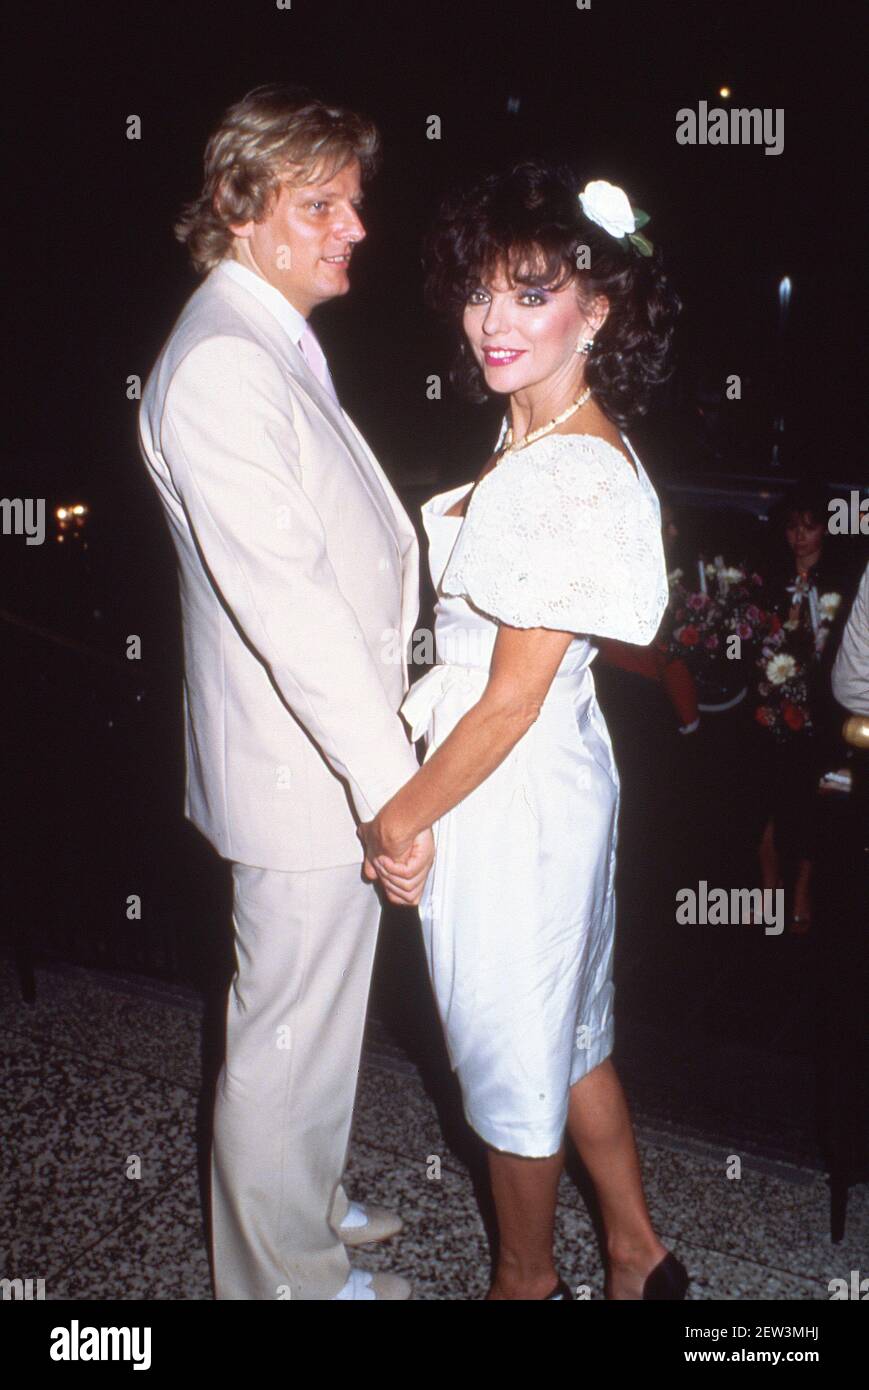 Joan Collins married former Swedish rock star Peter Holm in a private ceremony at the Little White Wedding Chapel on the Las Vegas Strip in Nevada in November 6, 1985 Credit: Ralph Dominguez/MediaPunch Stock Photo